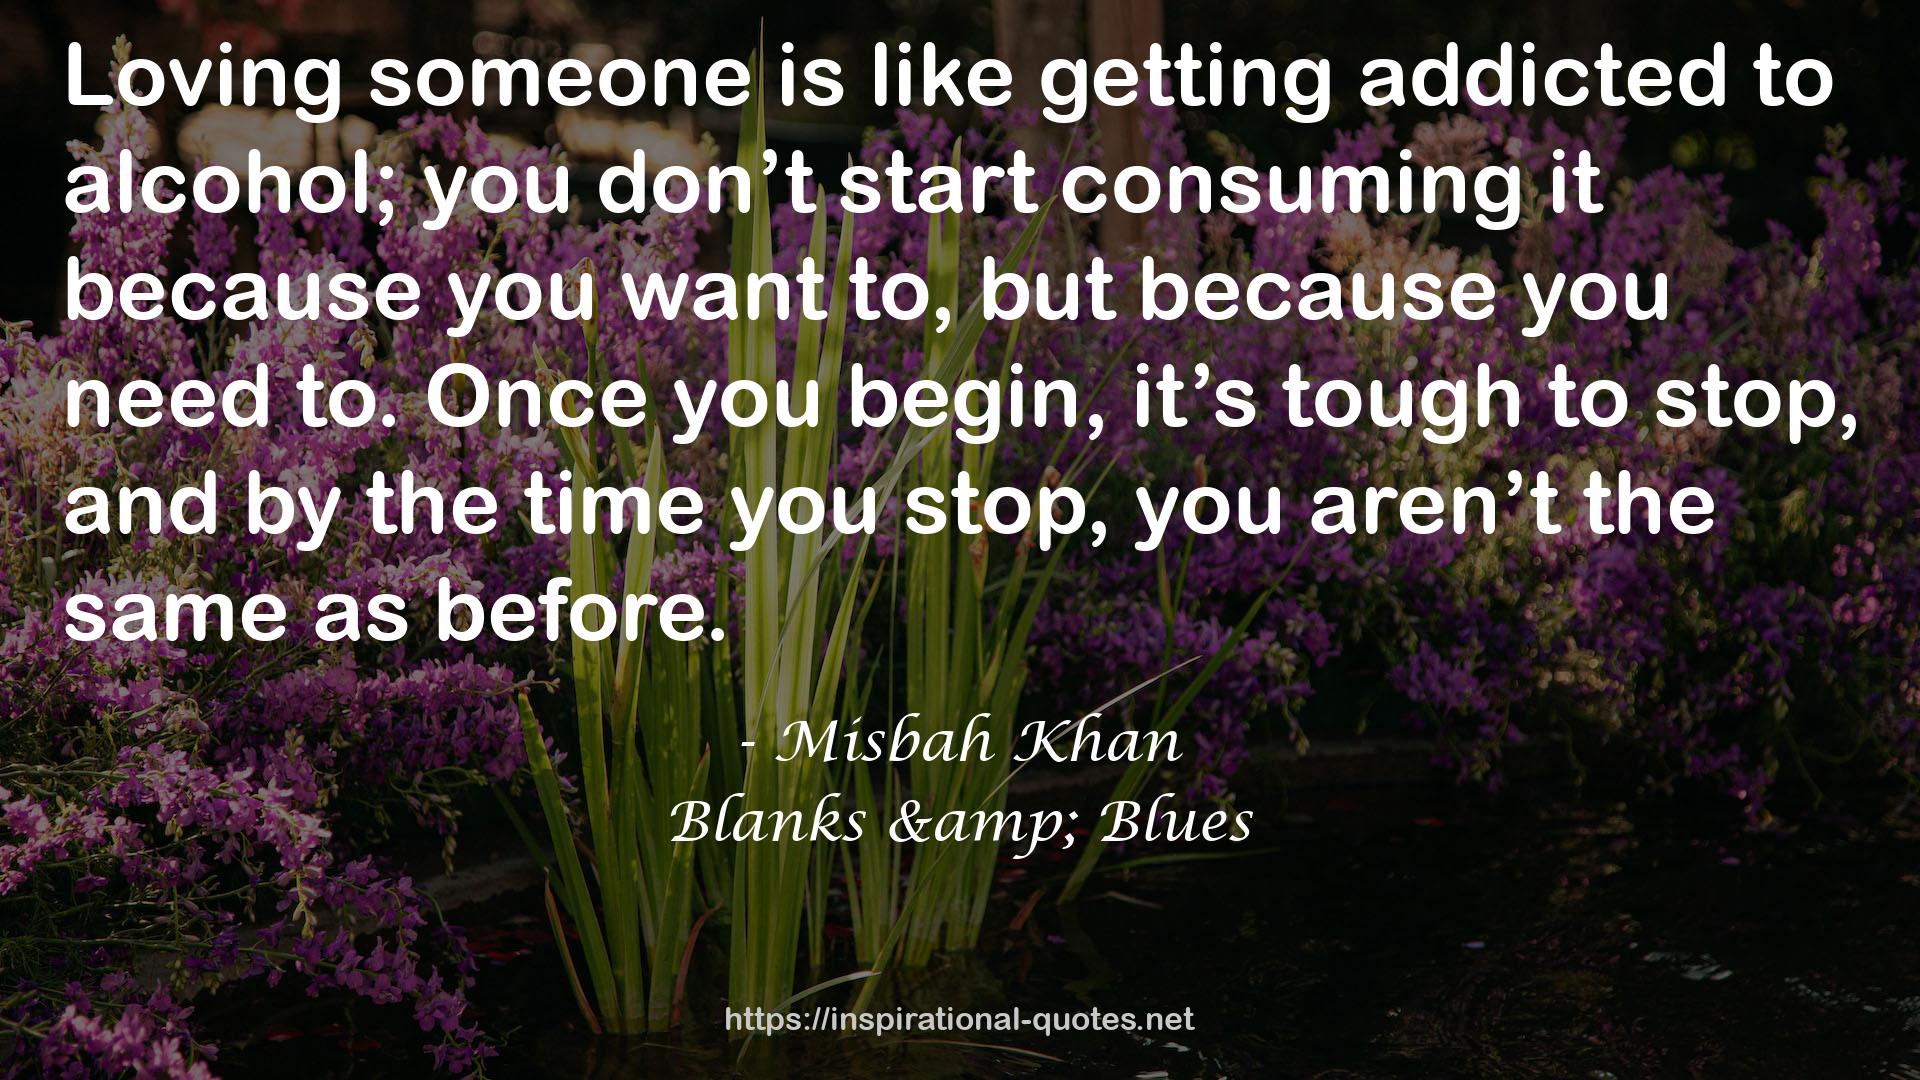 Blanks & Blues QUOTES